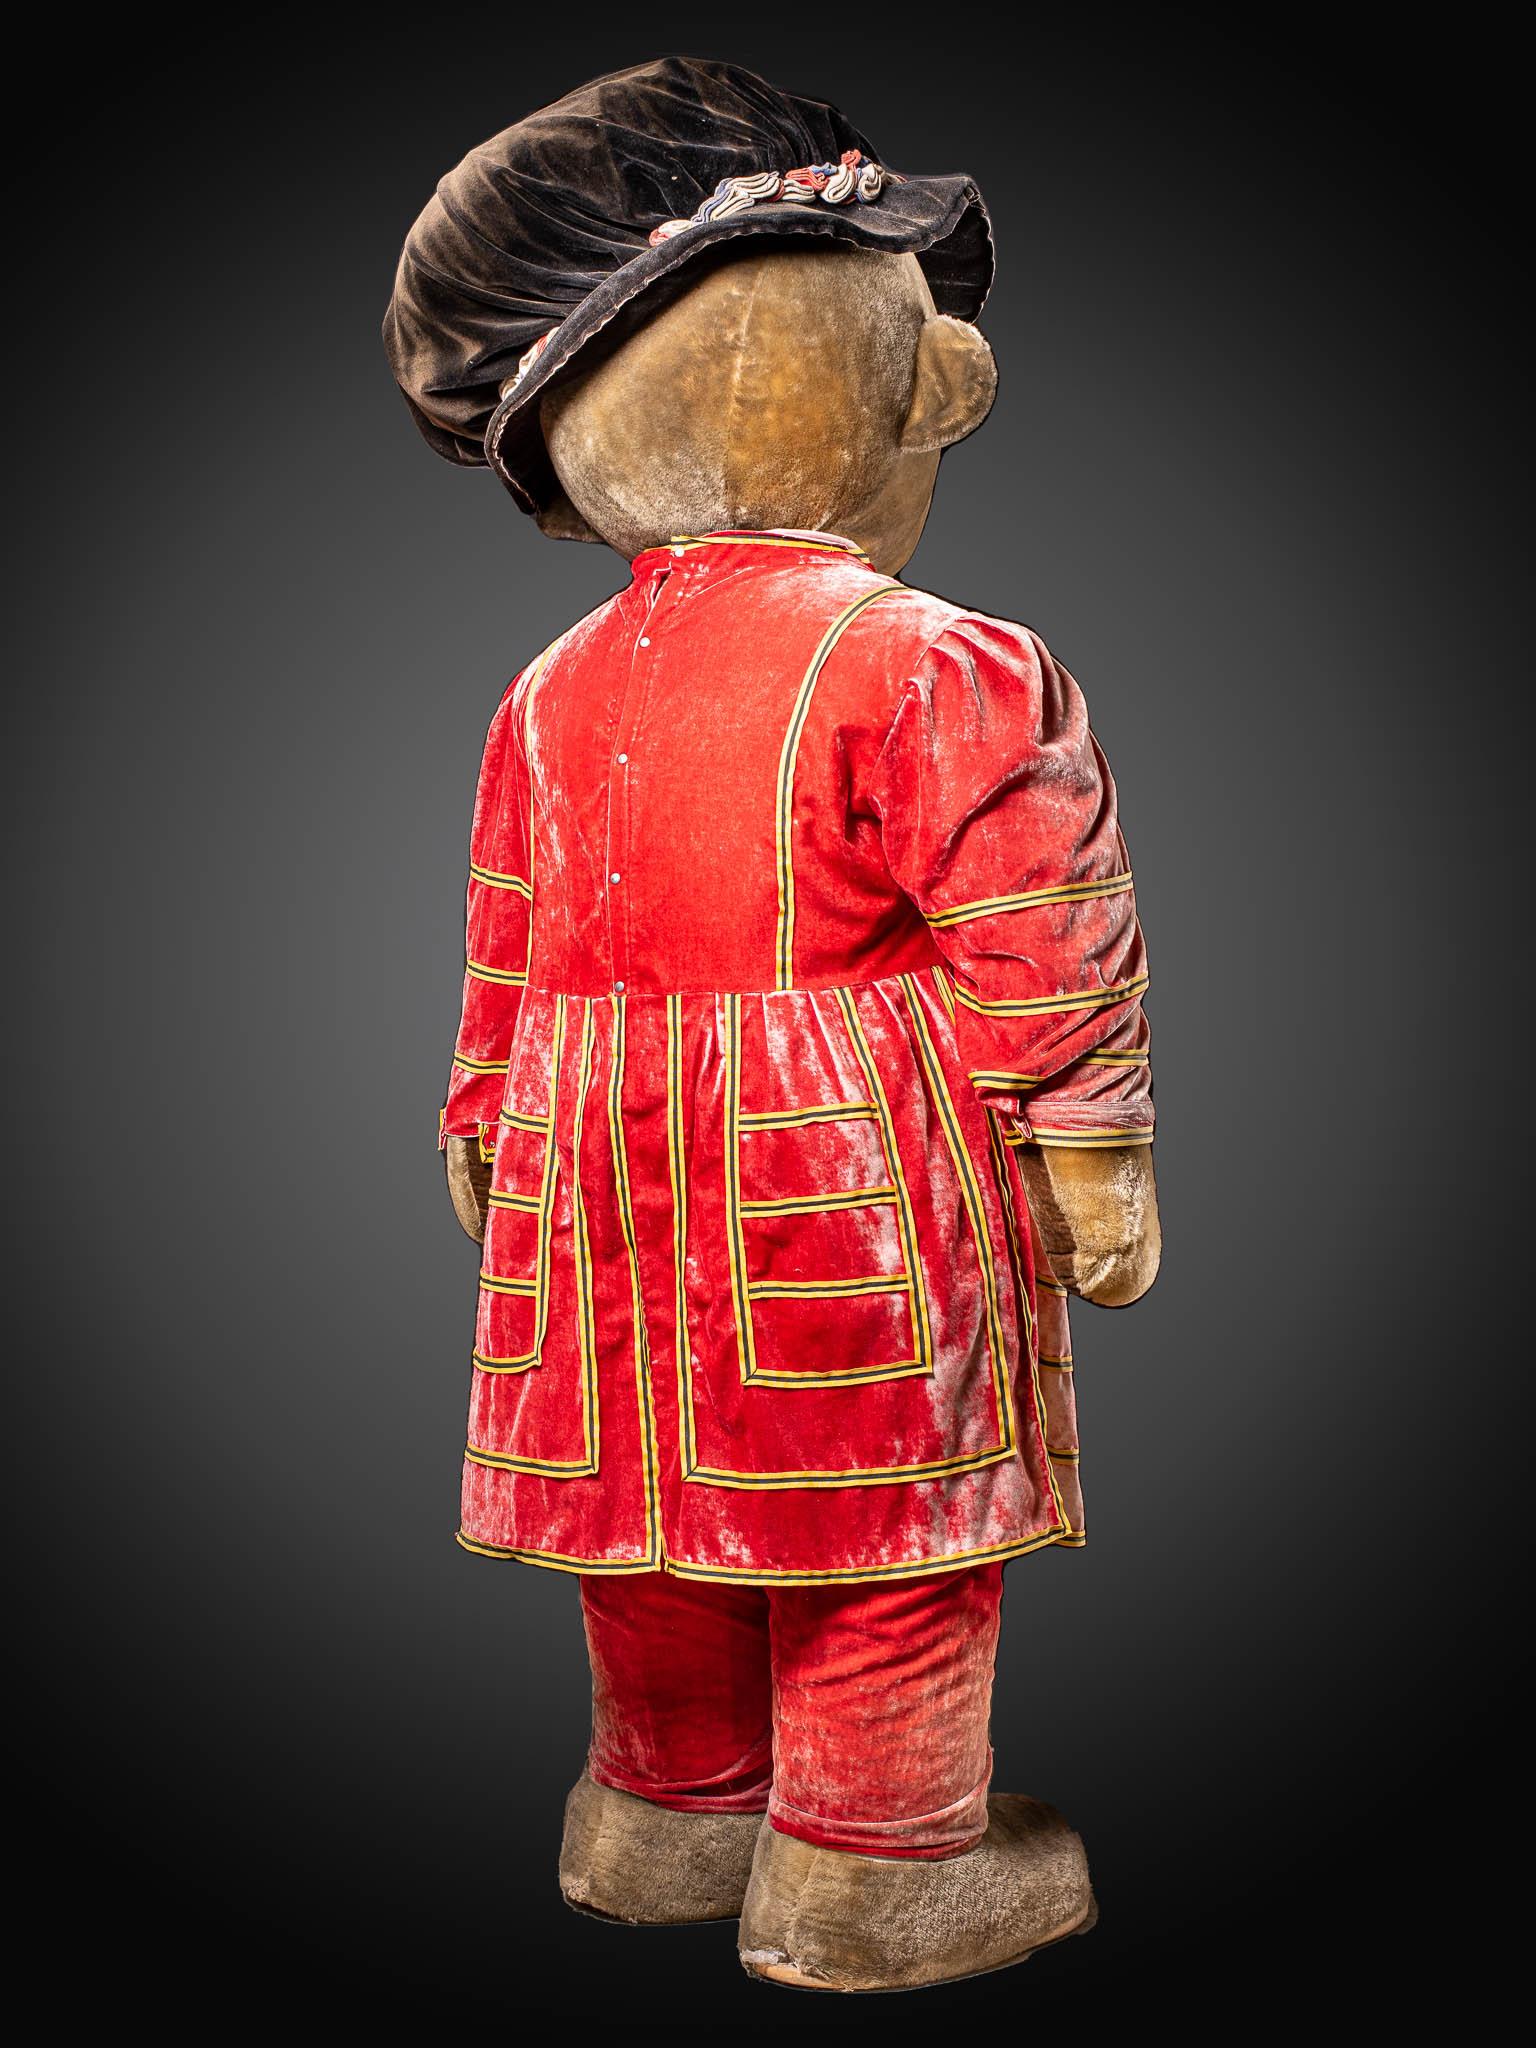 Organic Material Giant life-size Teddy Bear wearing the famous Tower of London guards’ uniform For Sale